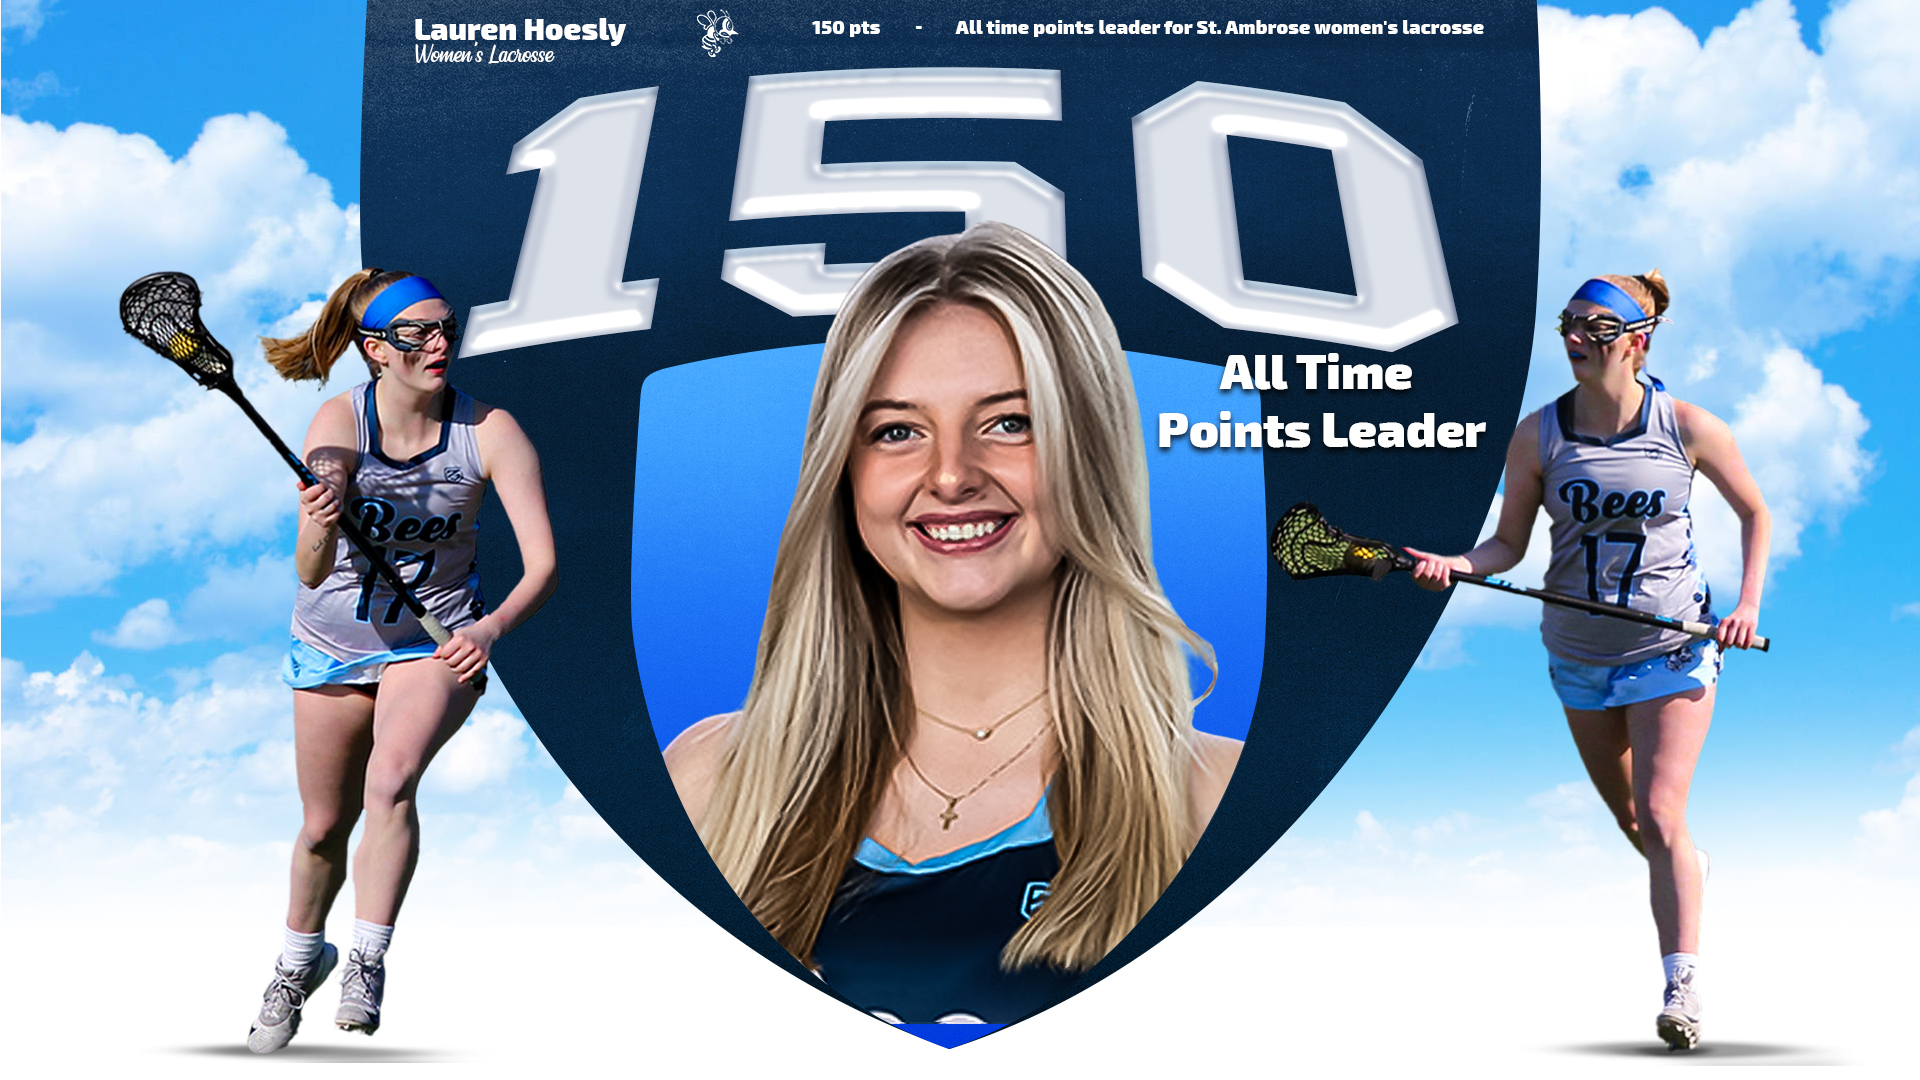 Lauren Hoesly earns top spot as all-time points leader